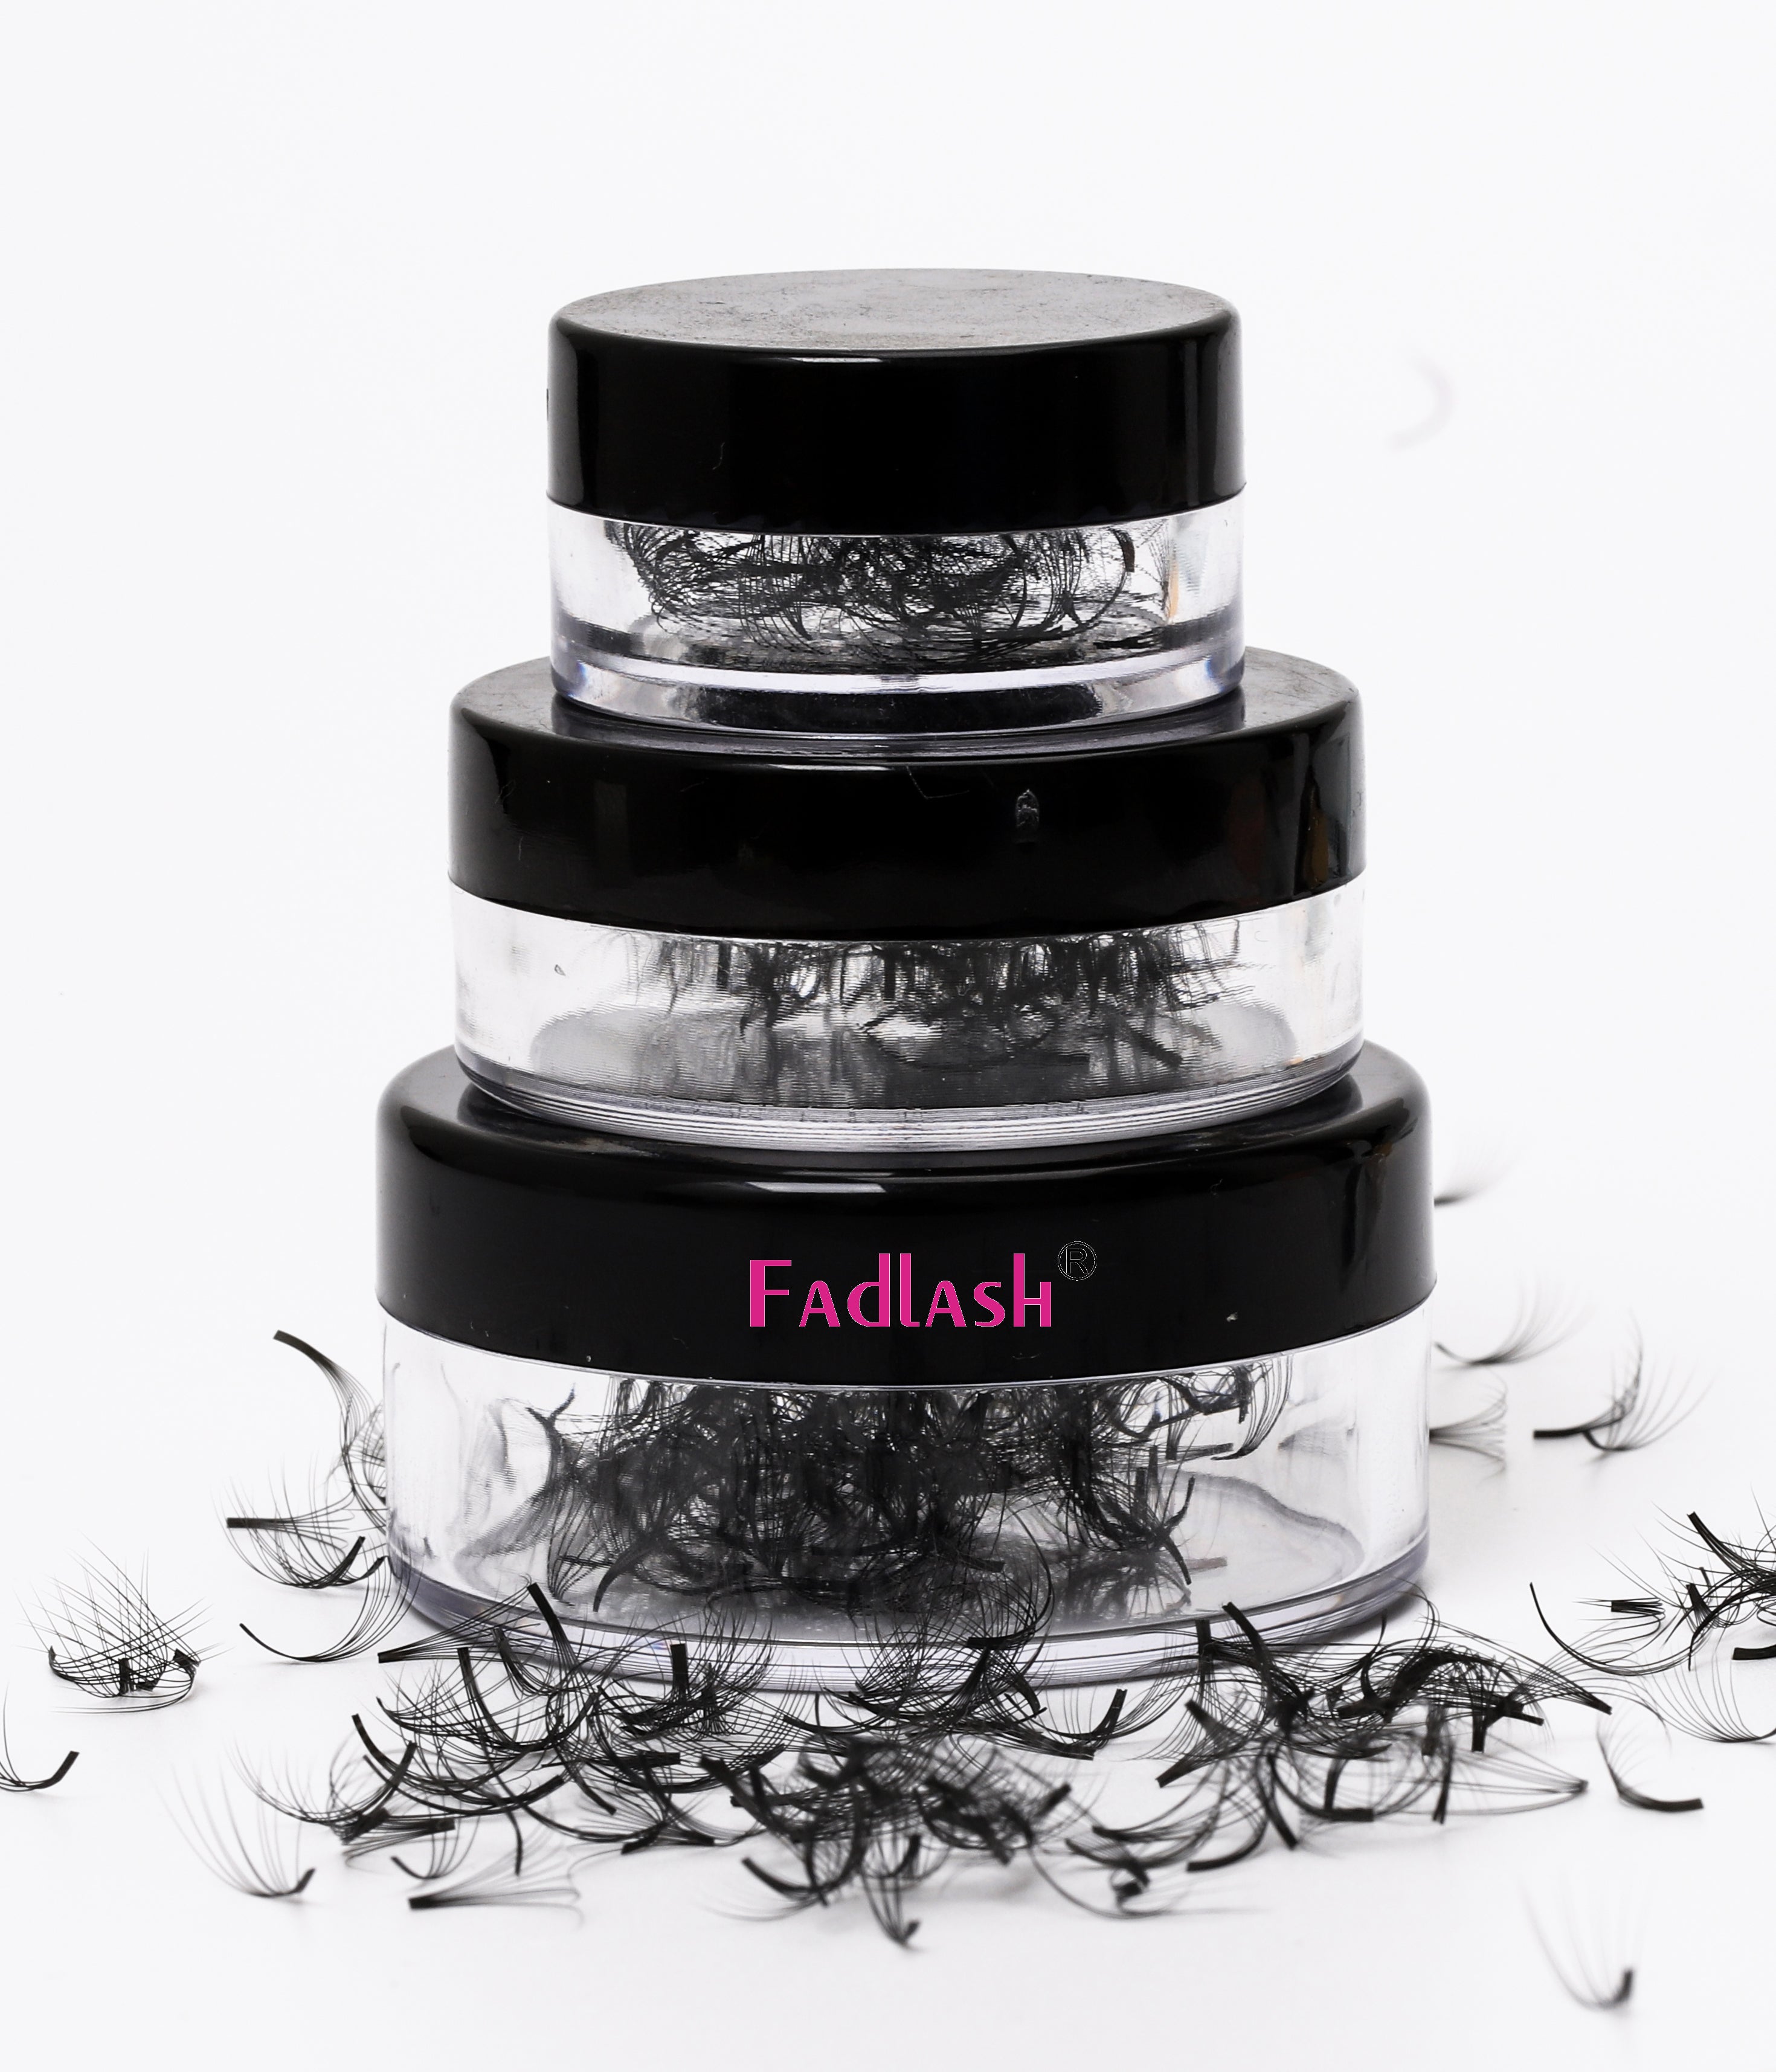 6D Handmade Loose Promade Fans Lashes -500 Fans - Fadlash